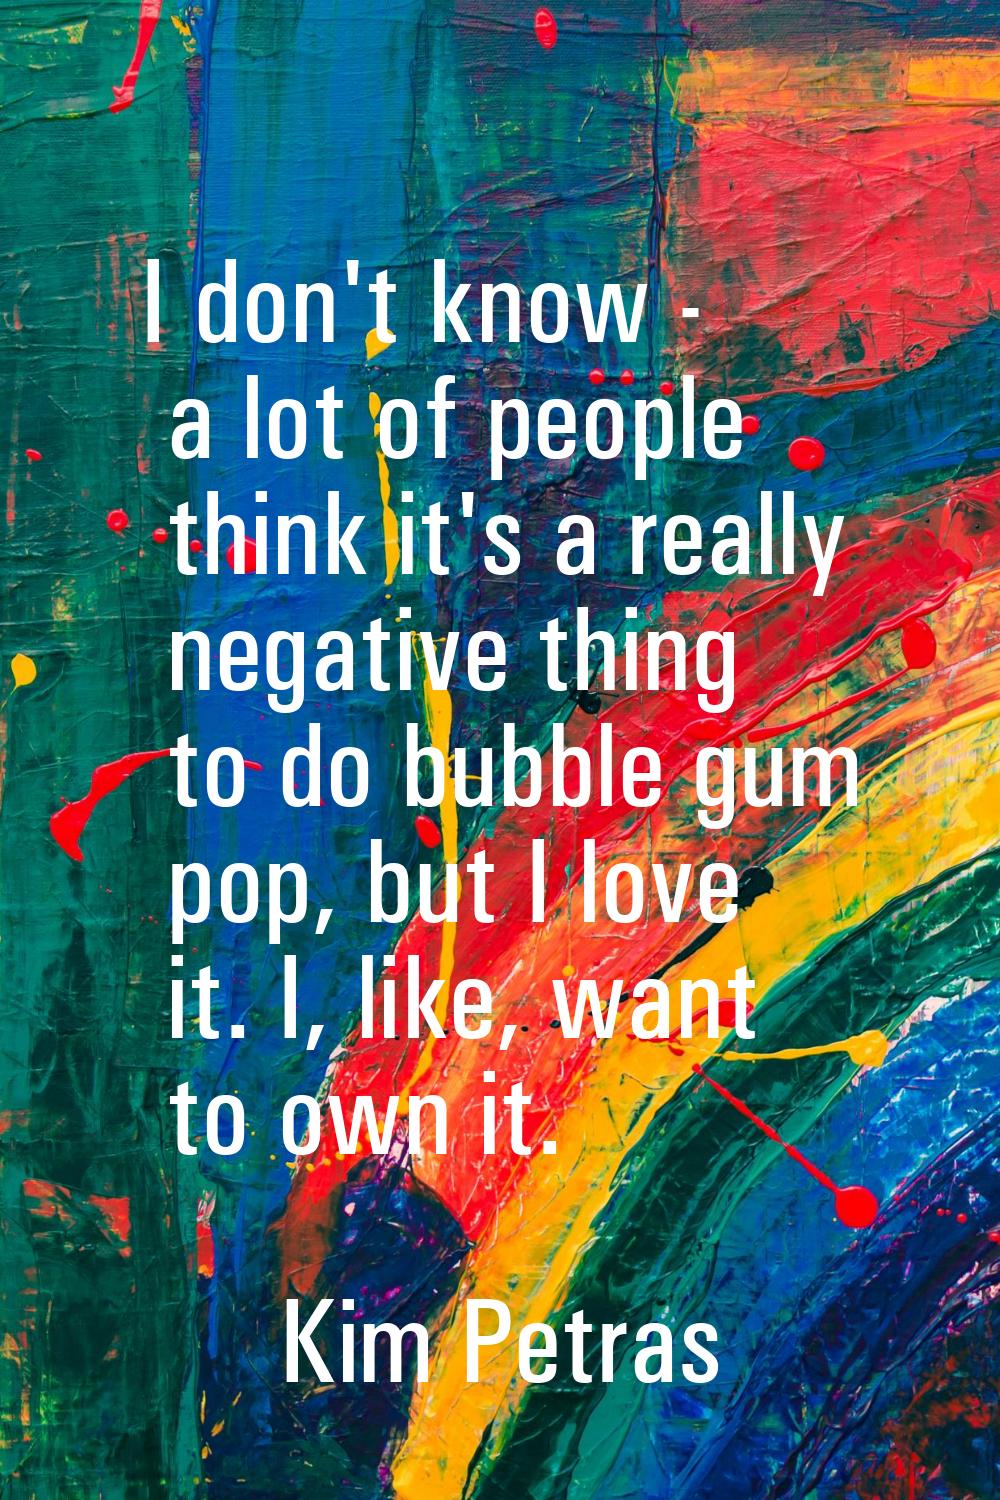 I don't know - a lot of people think it's a really negative thing to do bubble gum pop, but I love 